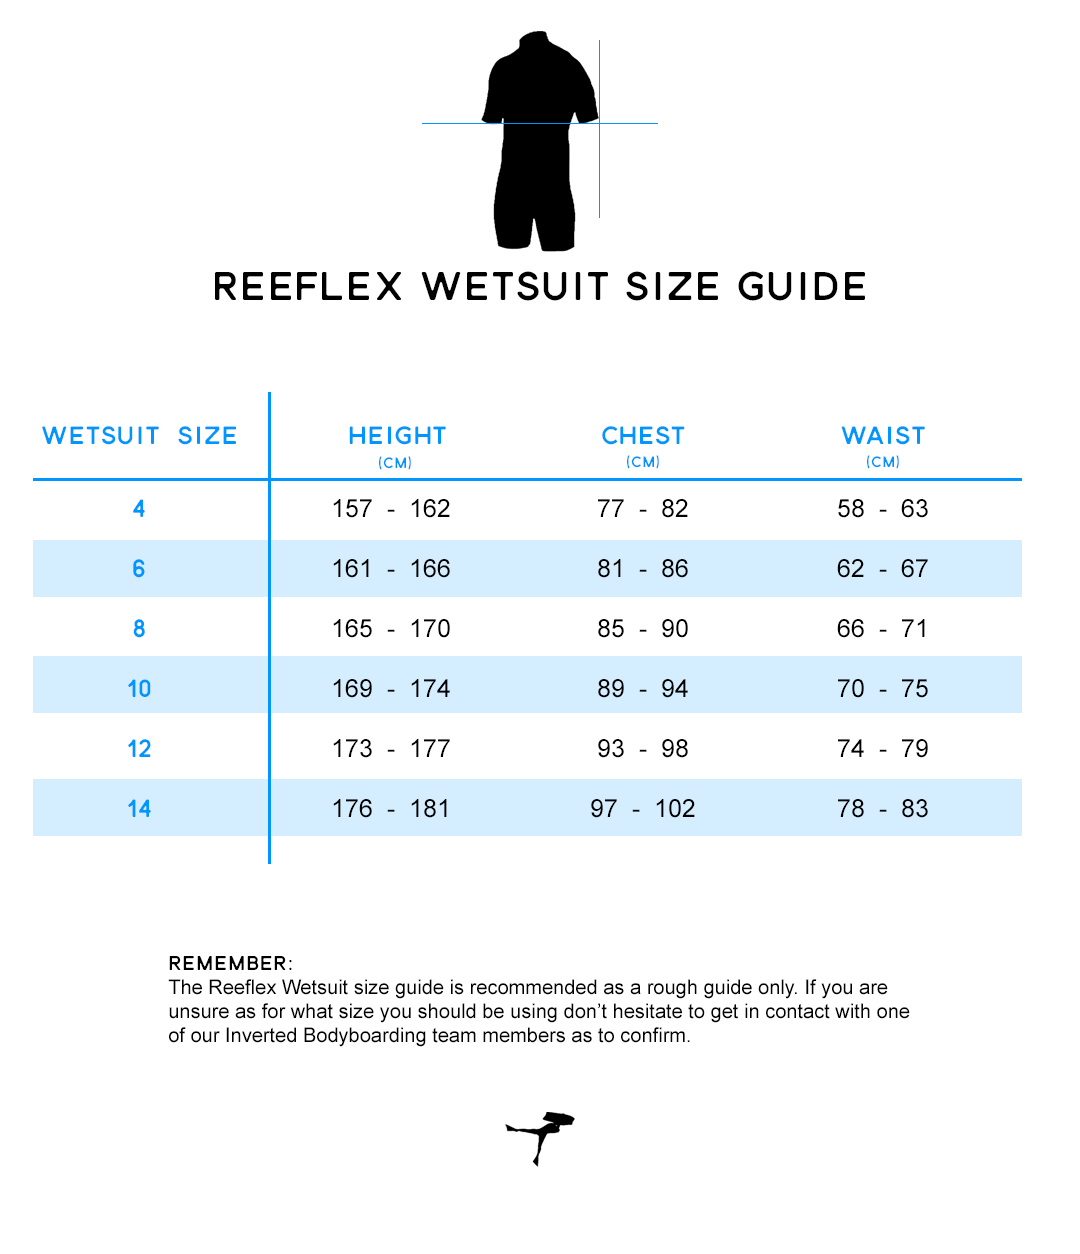 Reeflex Womens Size Guide at Inverted Bodyboarding